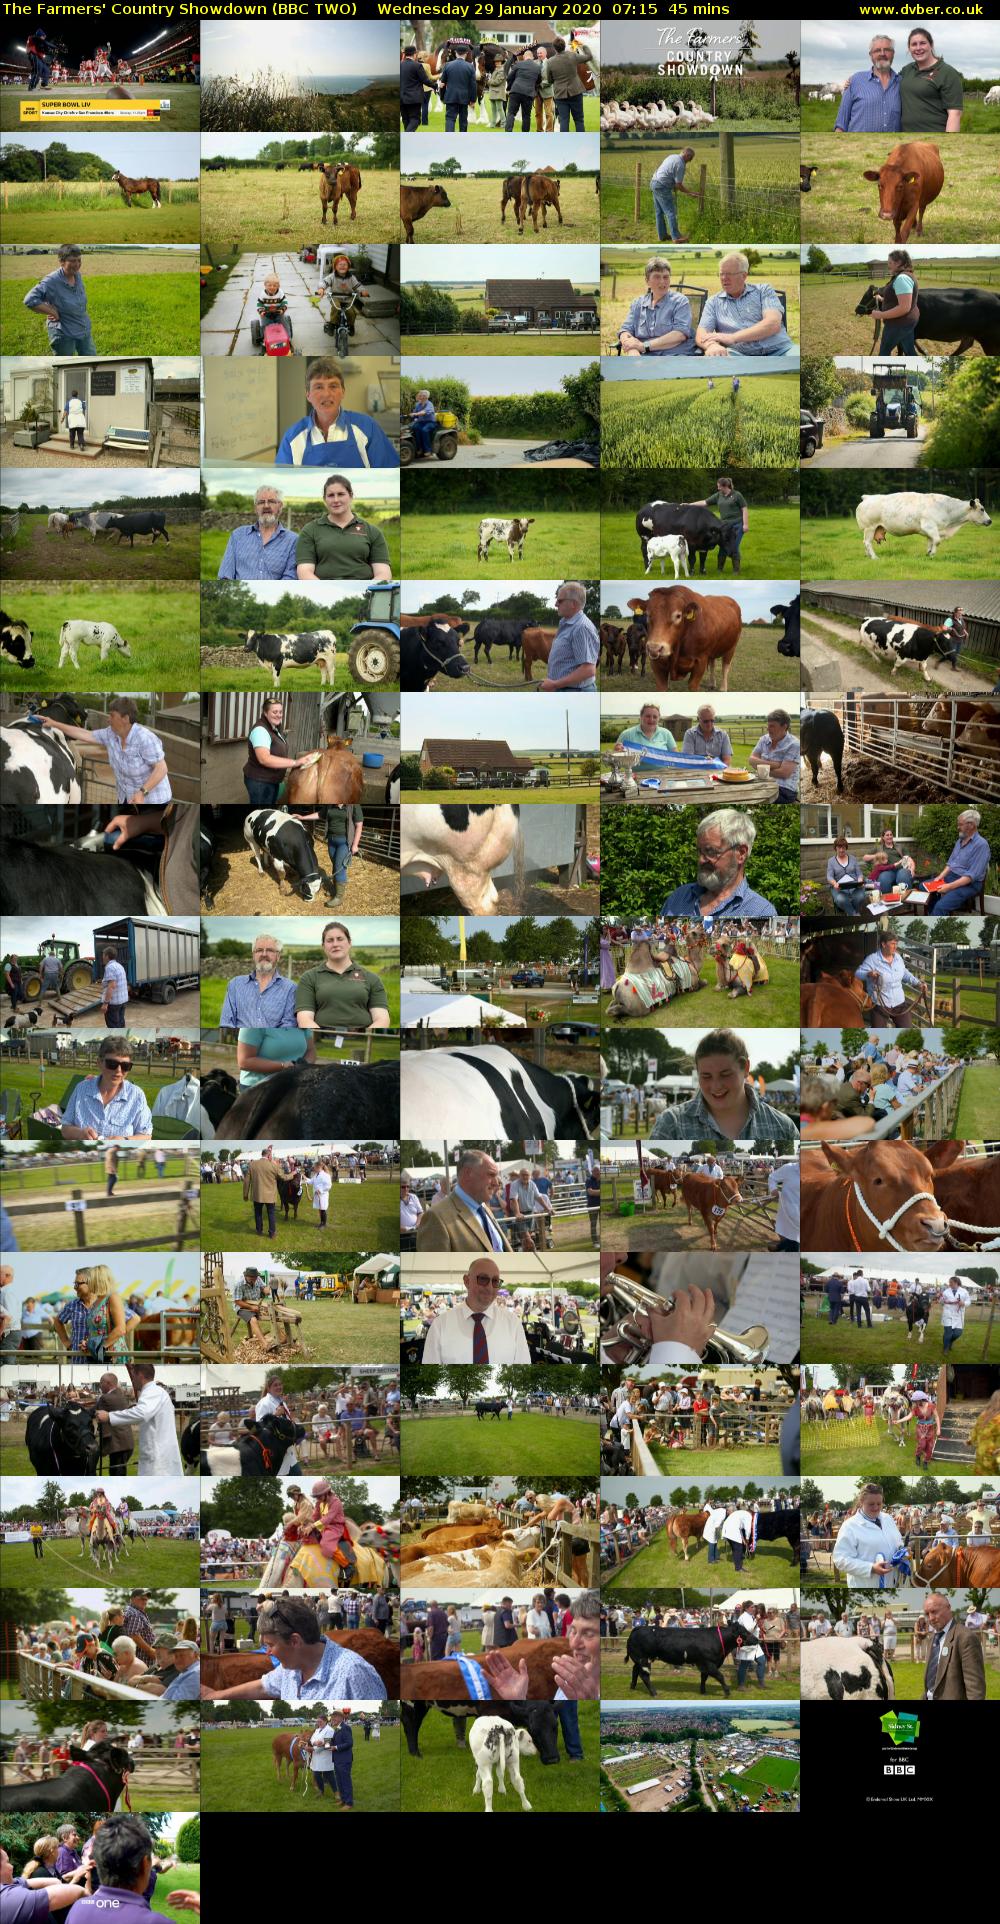 The Farmers' Country Showdown (BBC TWO) Wednesday 29 January 2020 07:15 - 08:00